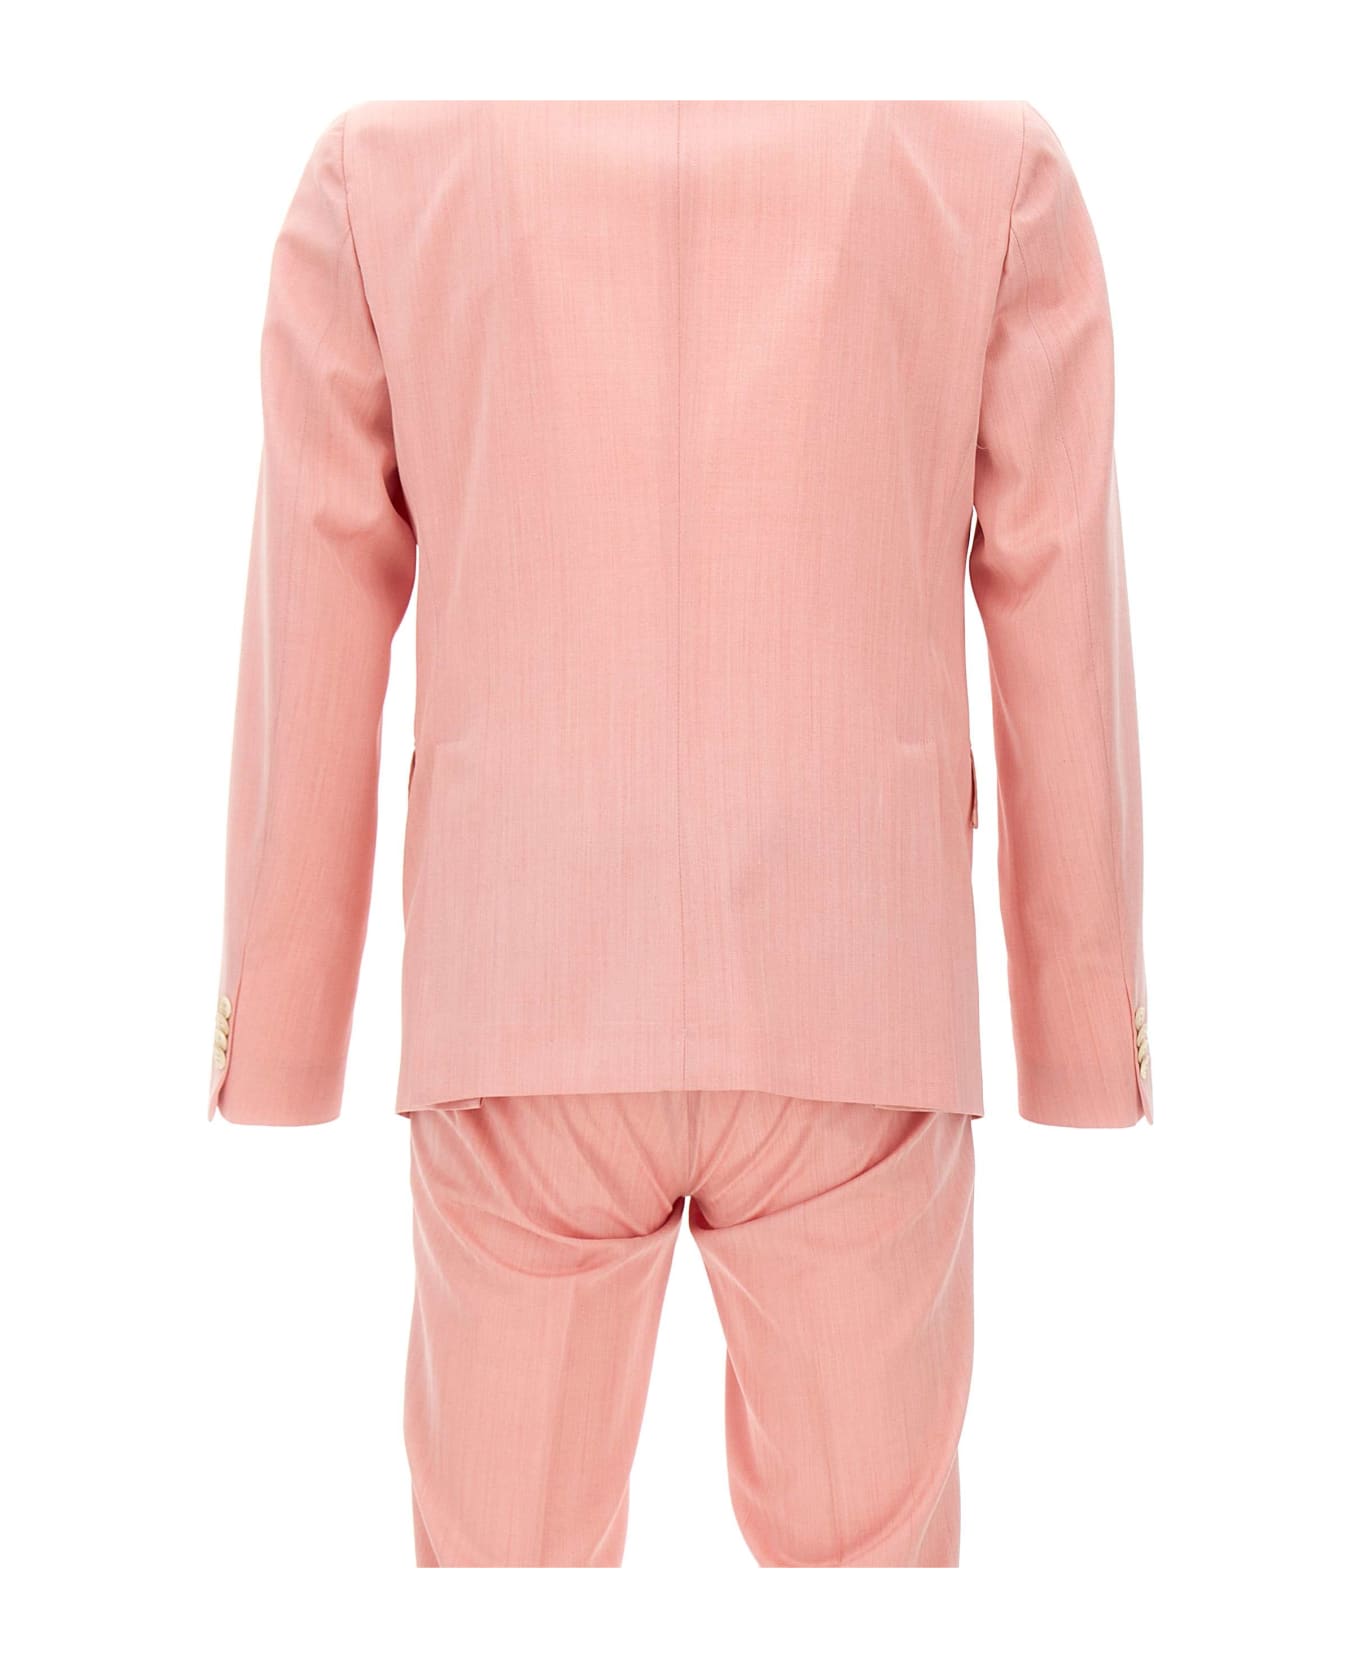 Brian Dales Cool Wool Two-piece Suit - PINK